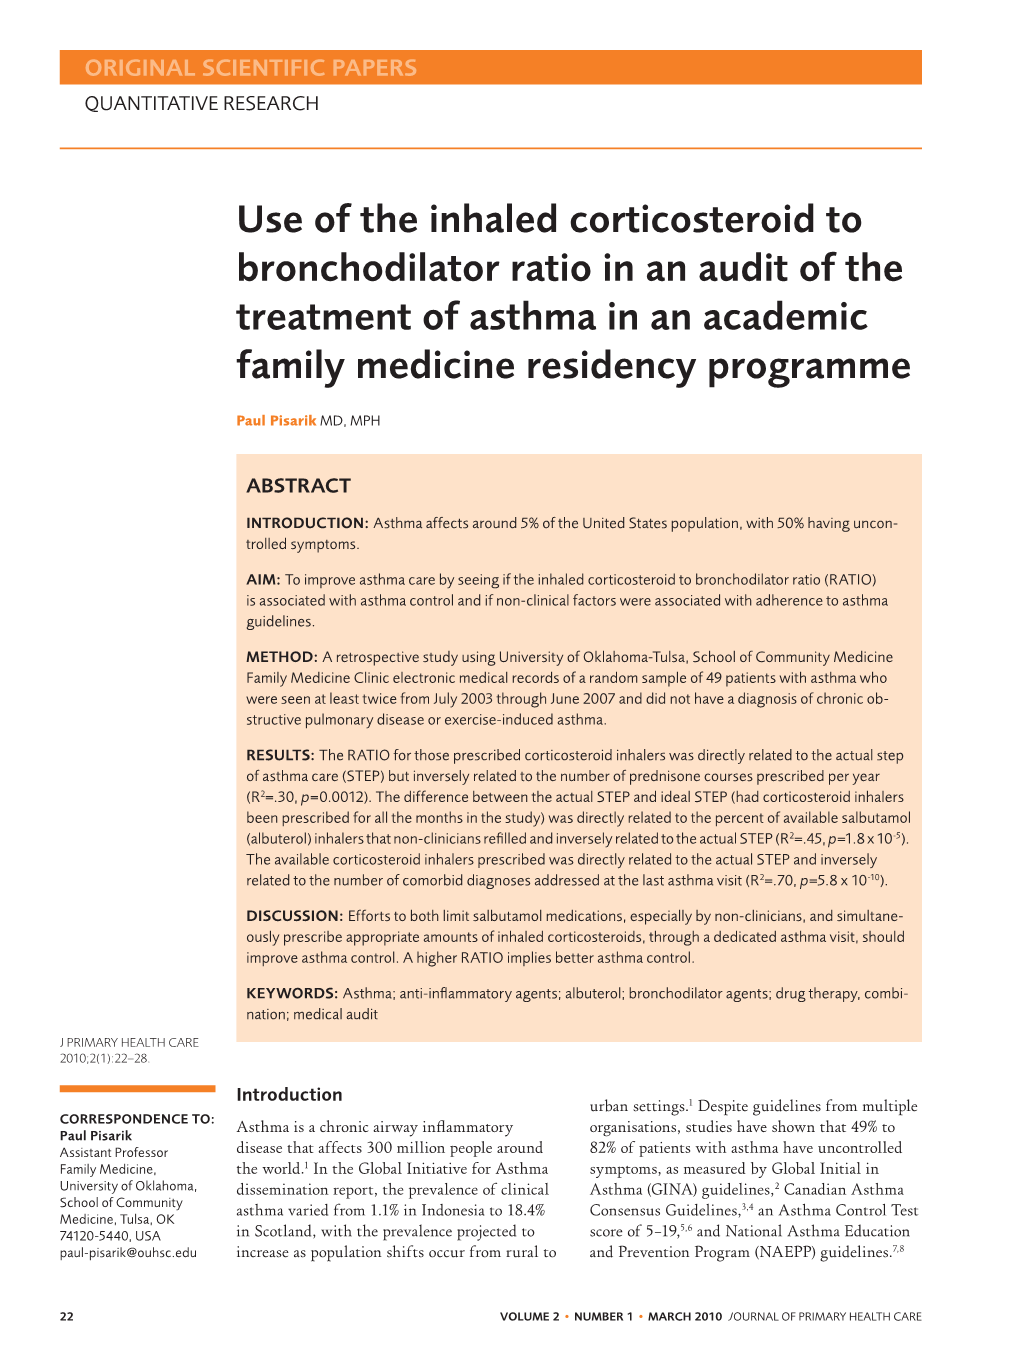 Use of the Inhaled Corticosteroid to Bronchodilator Ratio in an Audit of the Treatment of Asthma in an Academic Family Medicine Residency Programme